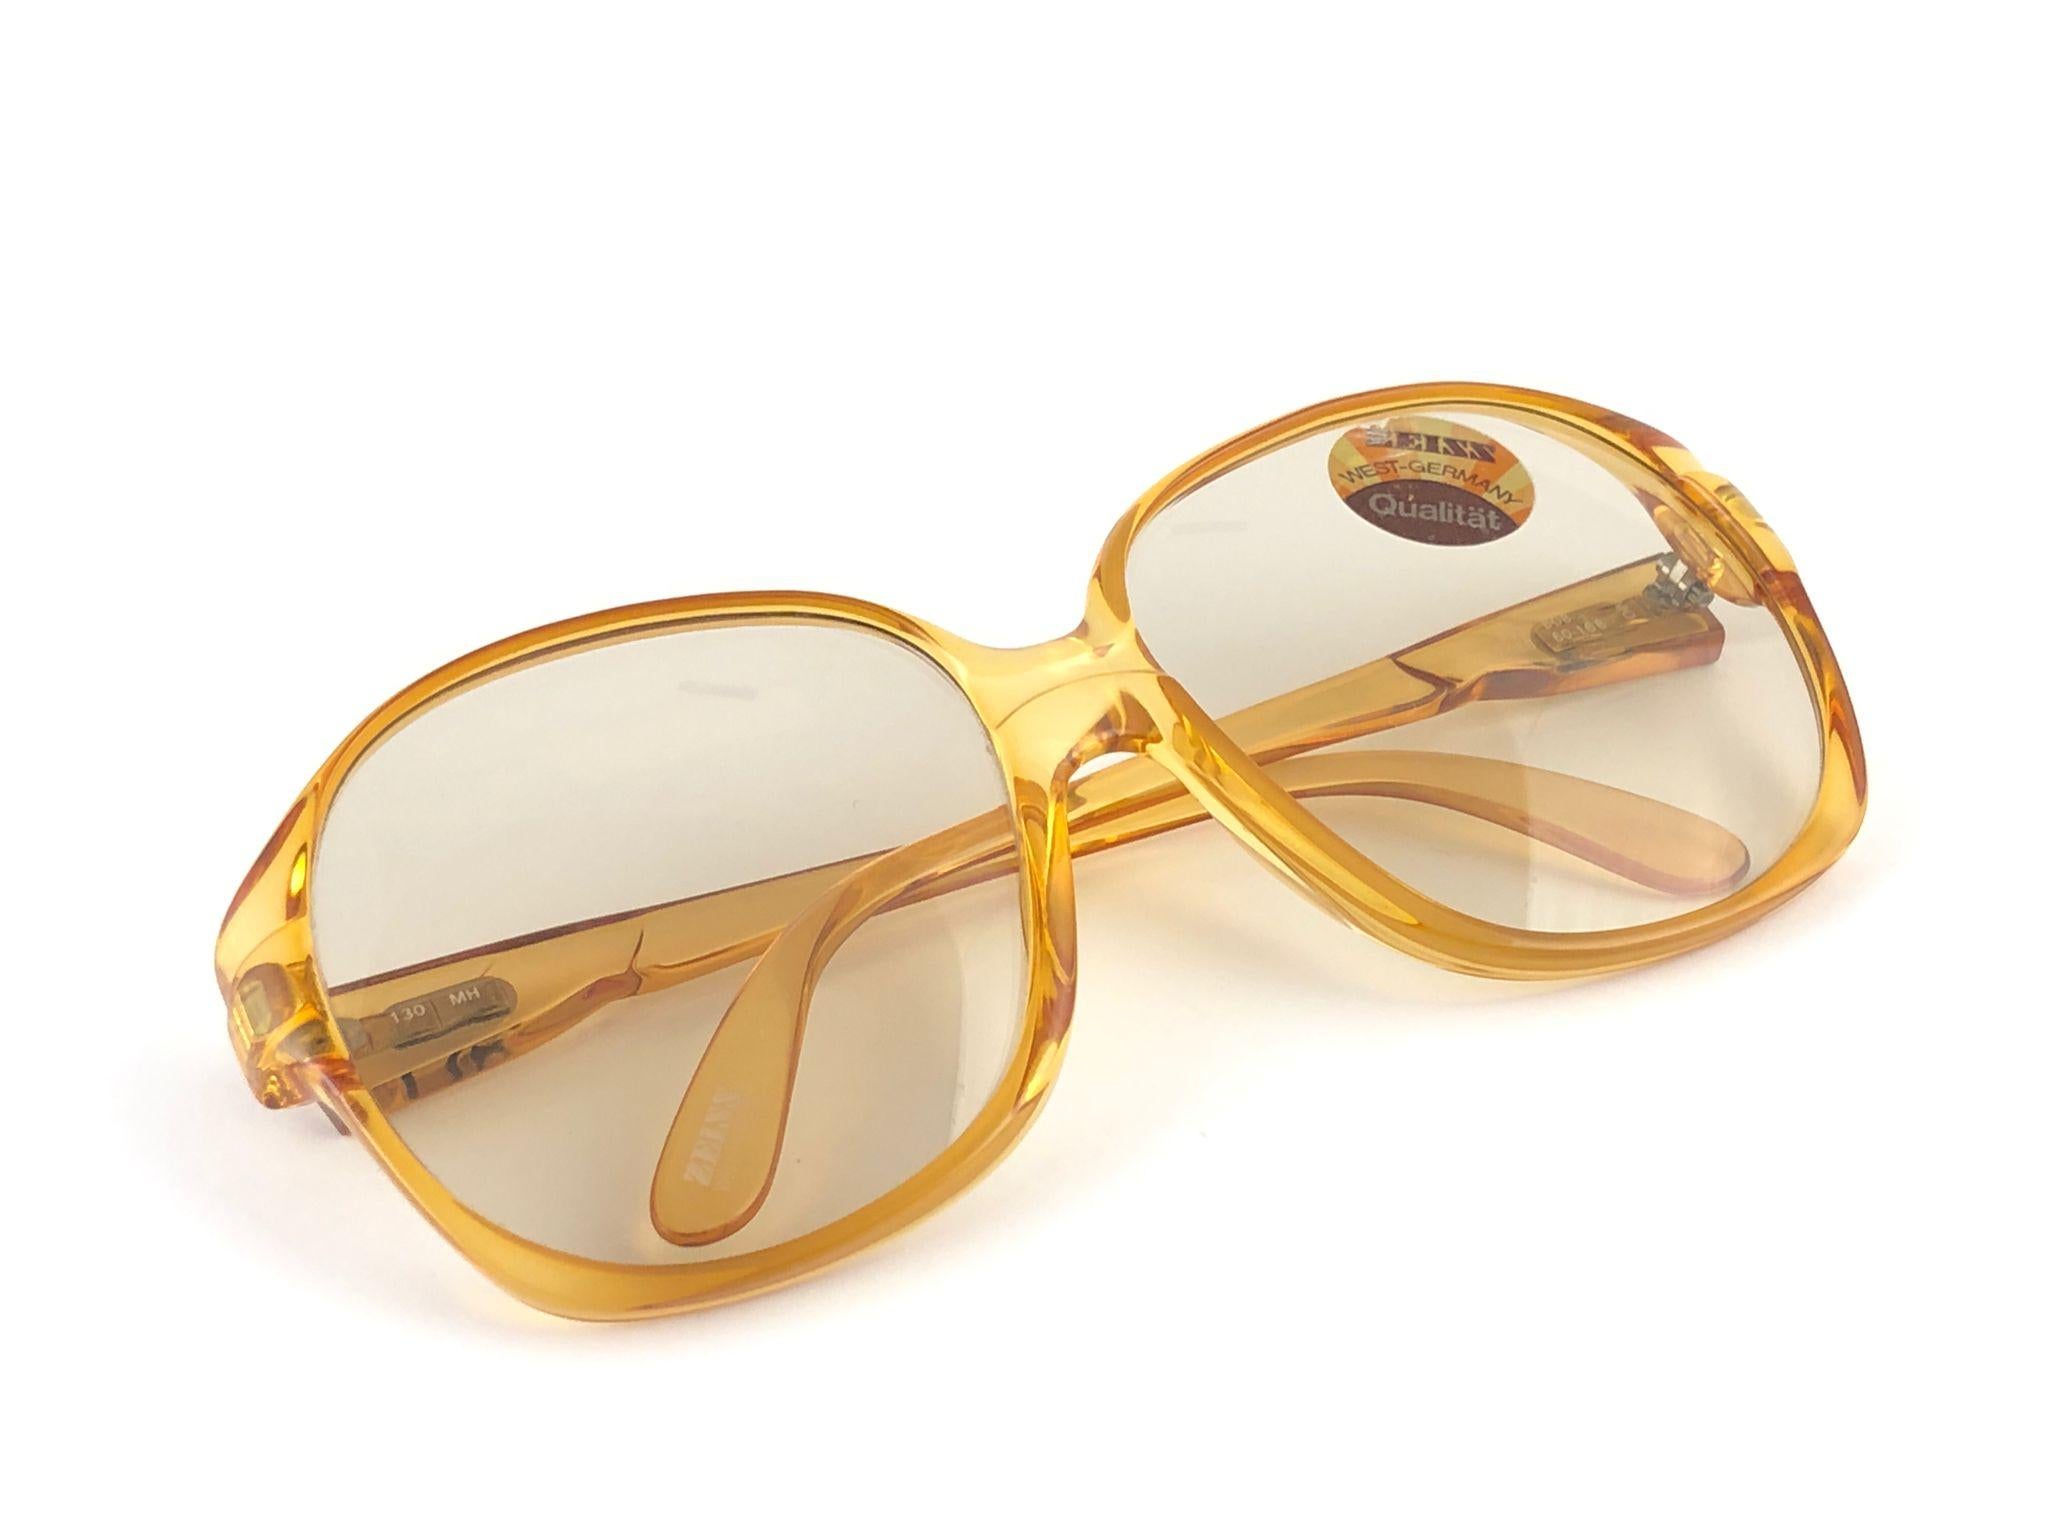 New Vintage Zeiss 8068 Translucent Amber Made W. Germany 1970 Sunglasses For Sale 1